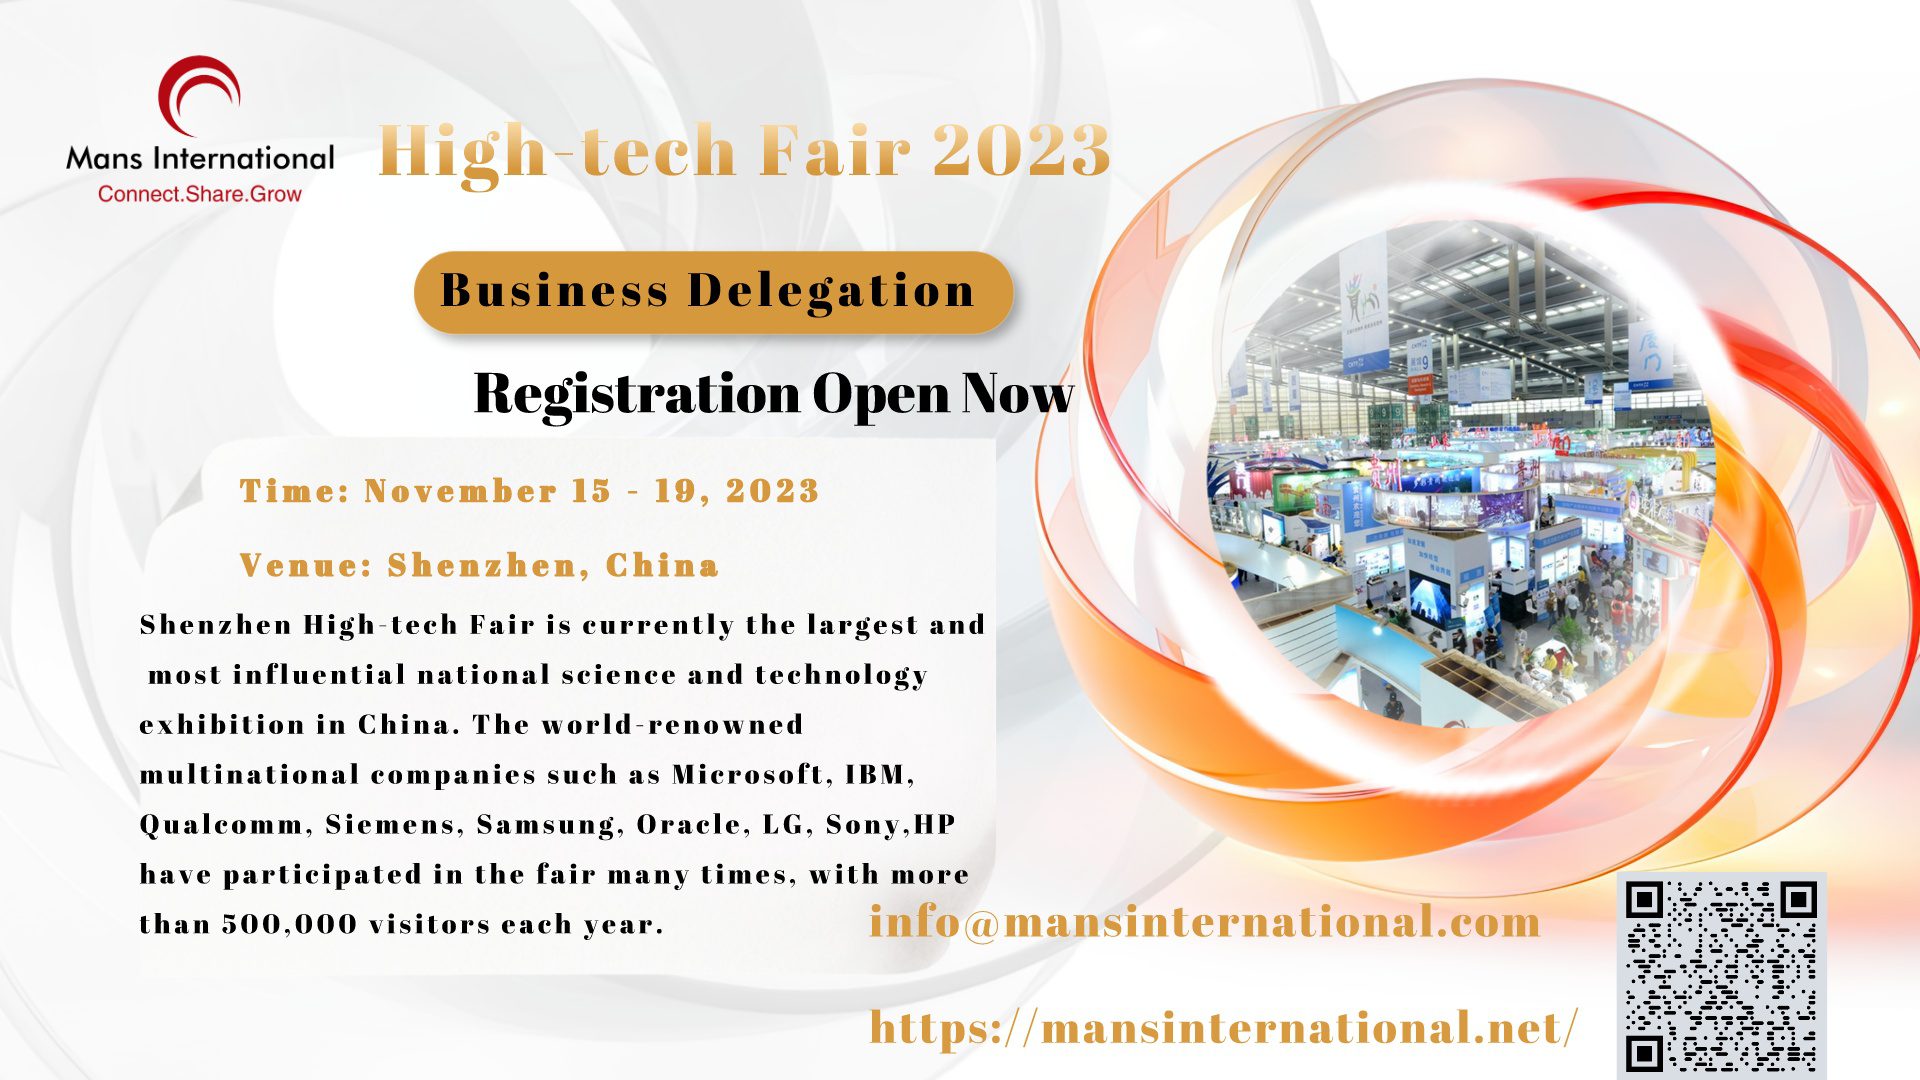 Join Mans International Business Delegation and Explore Opportunities at High-tech Fair 2023